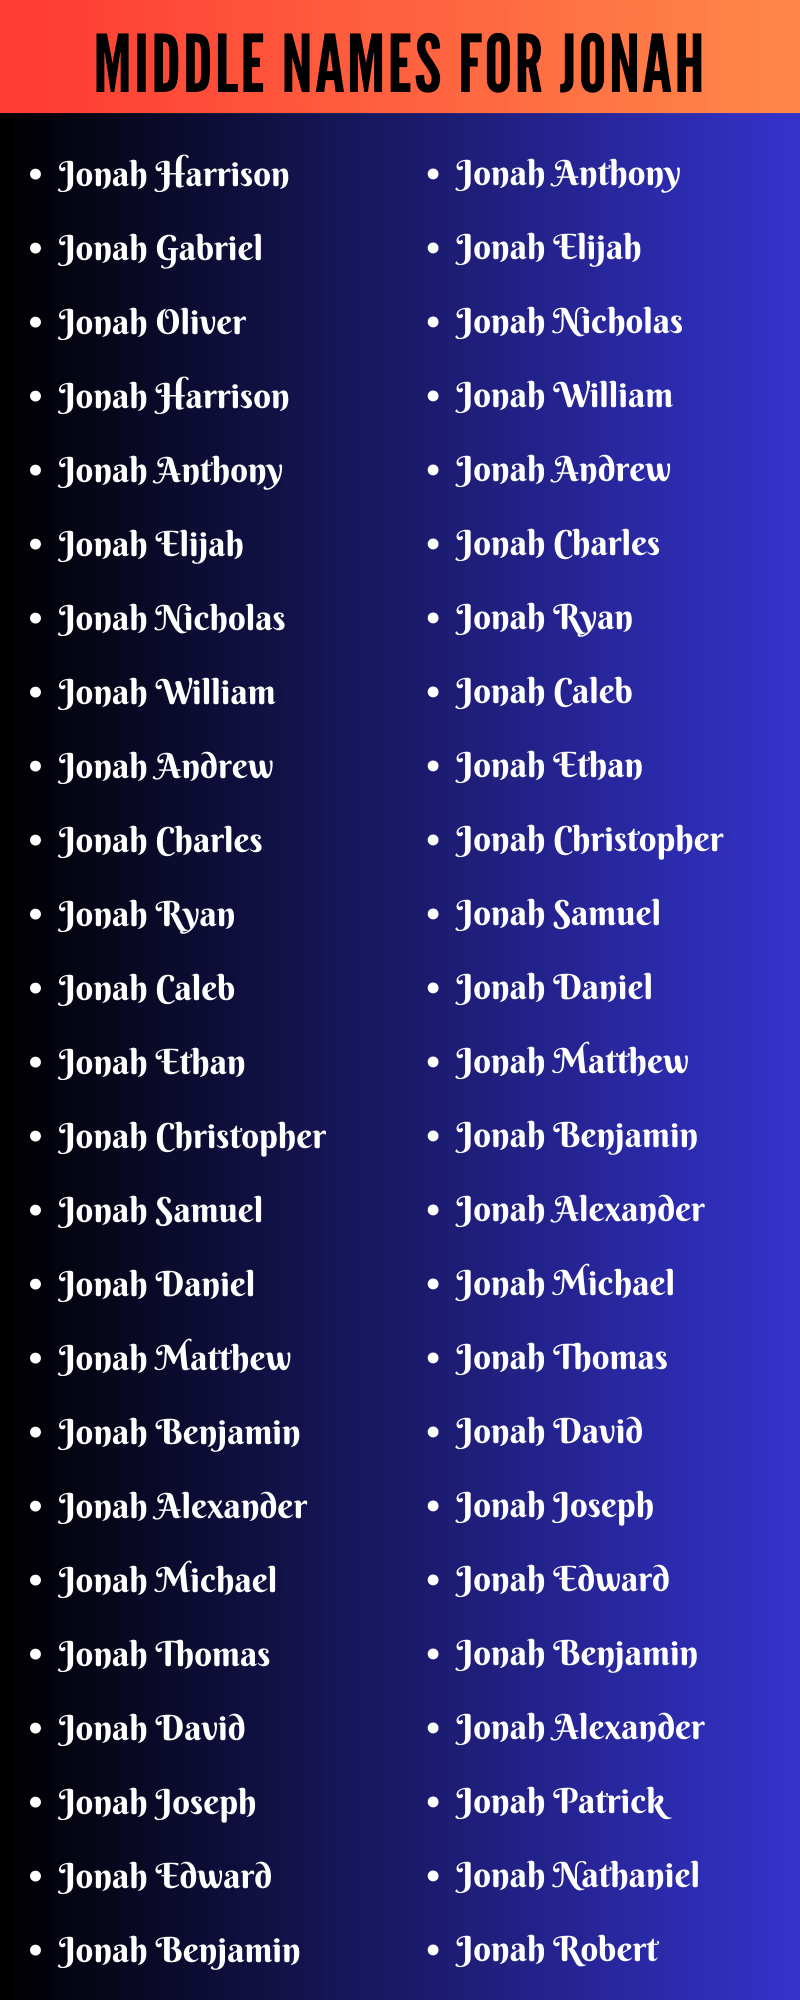 Middle Names For Jonah